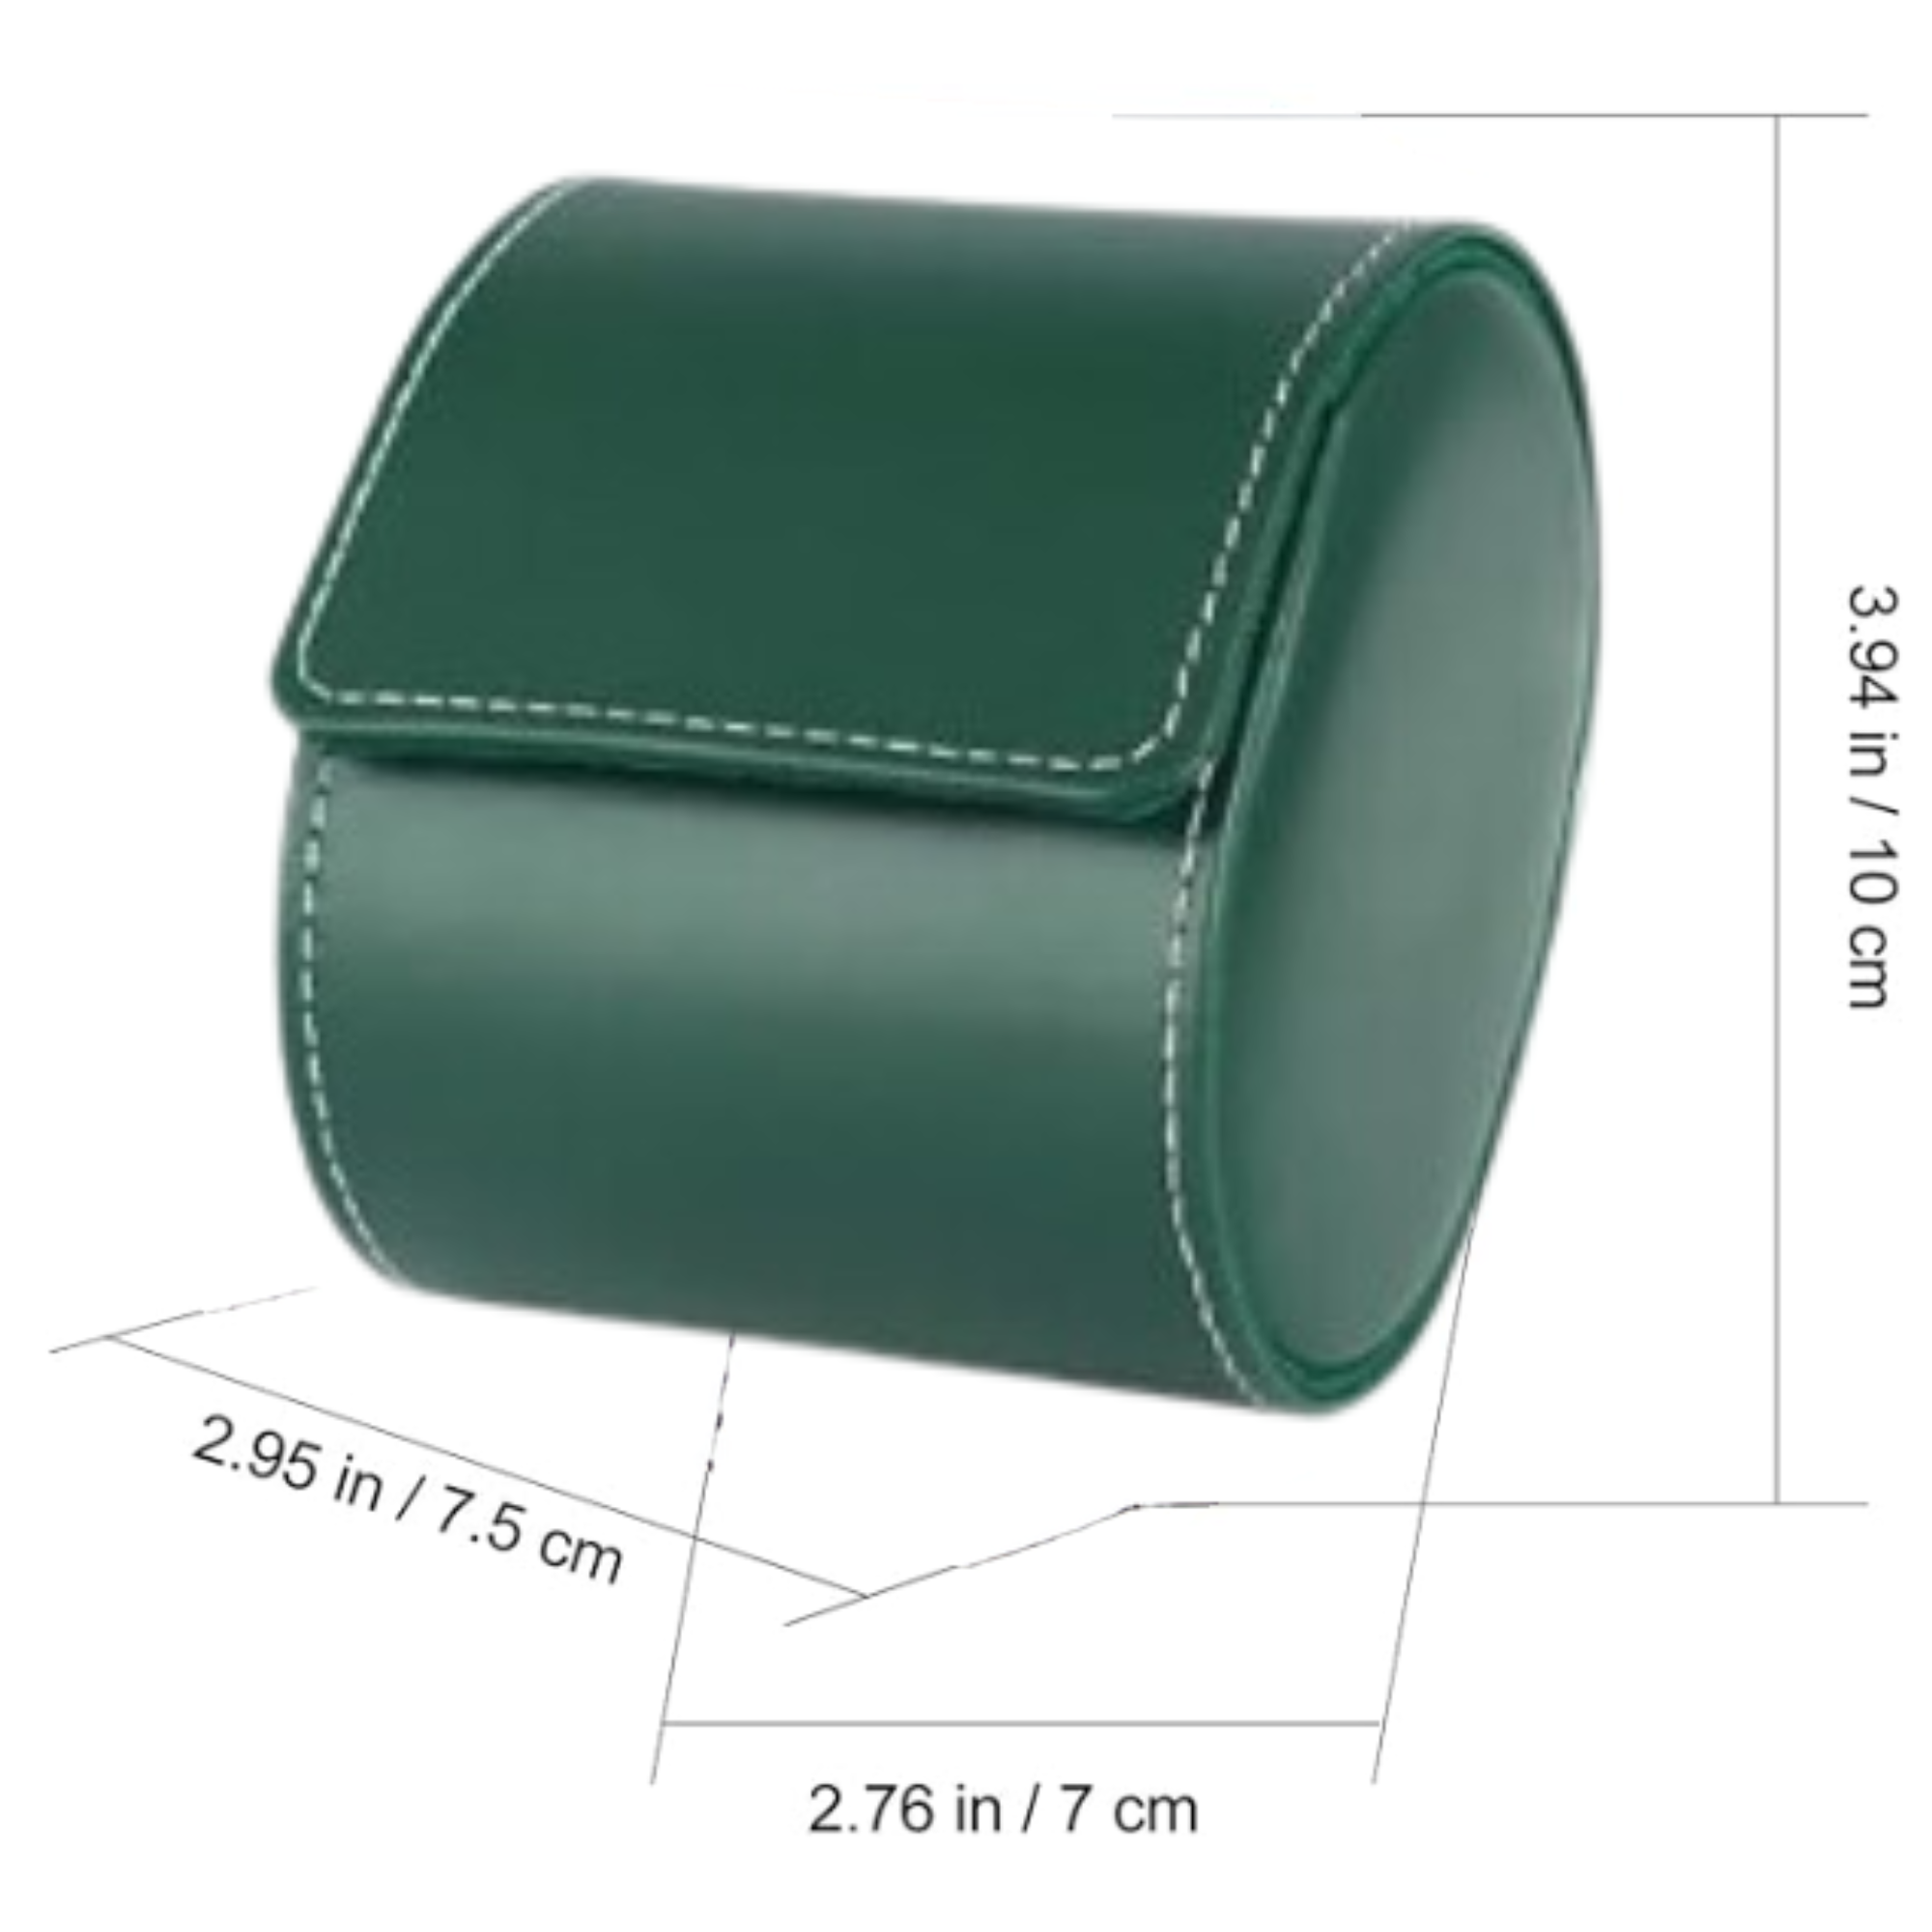 Dream Watches  Minuscle Premium Watch Storage and Travel Case : Single Slot  | Green Leather